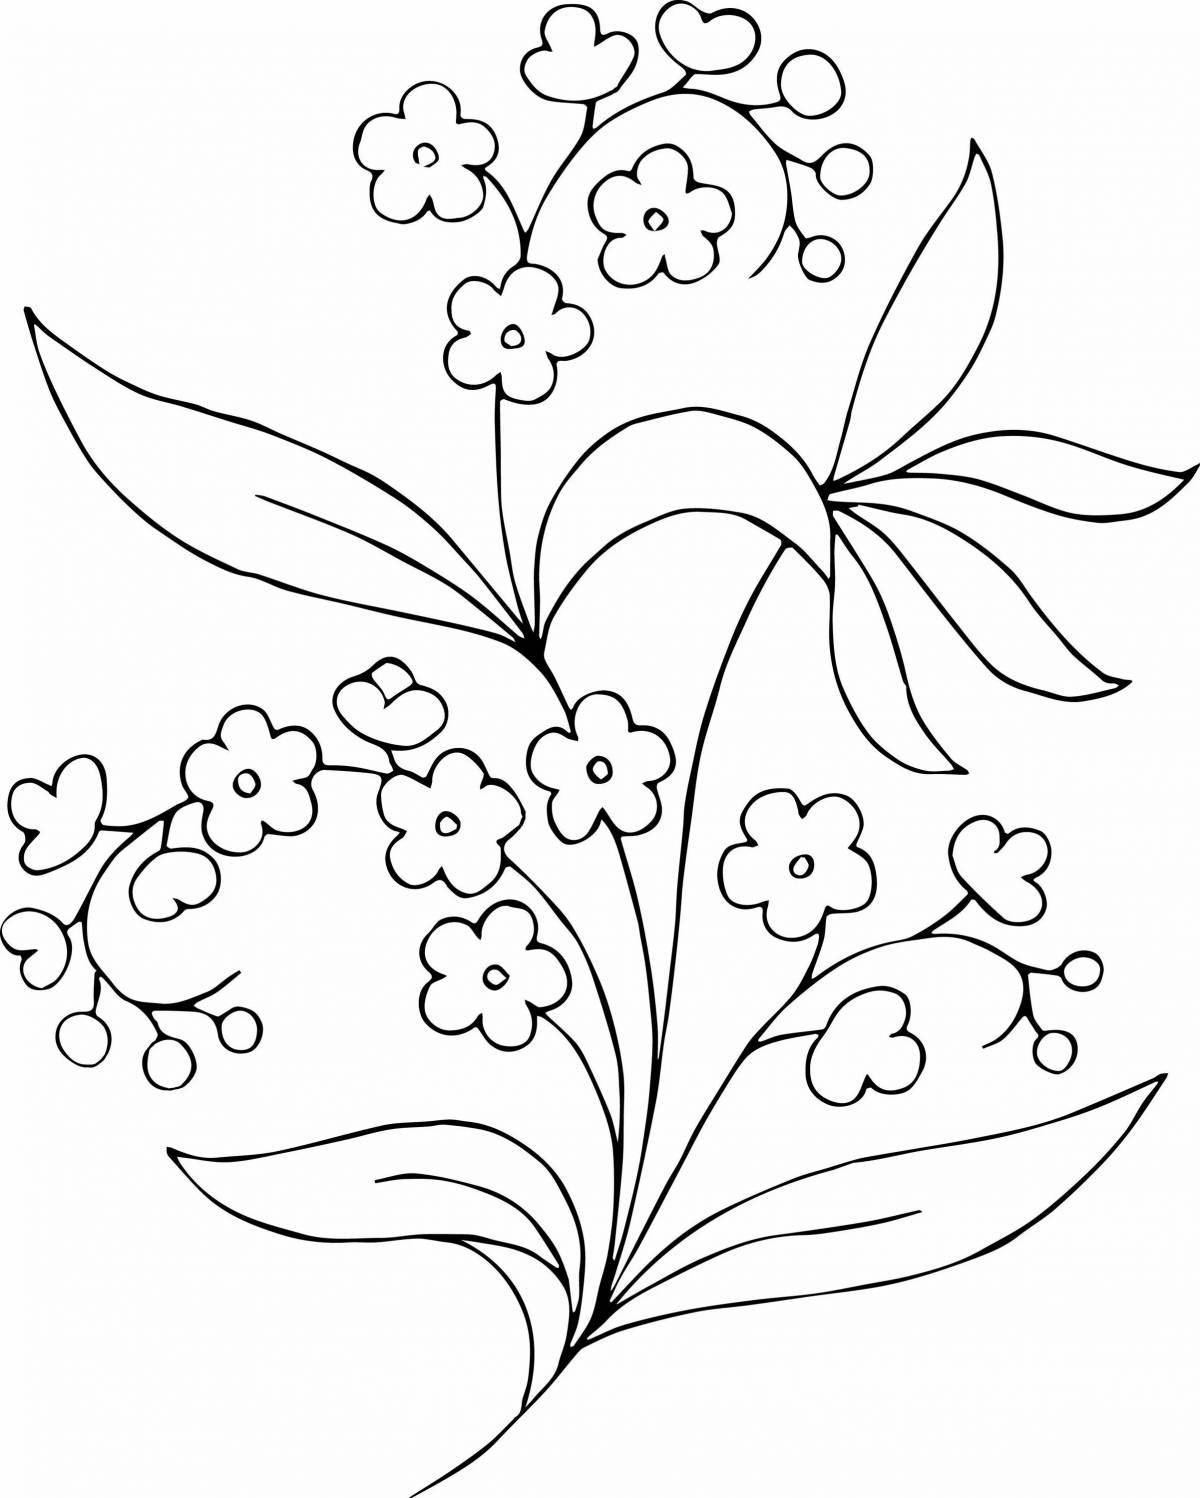 Delightful forget-me-not coloring page